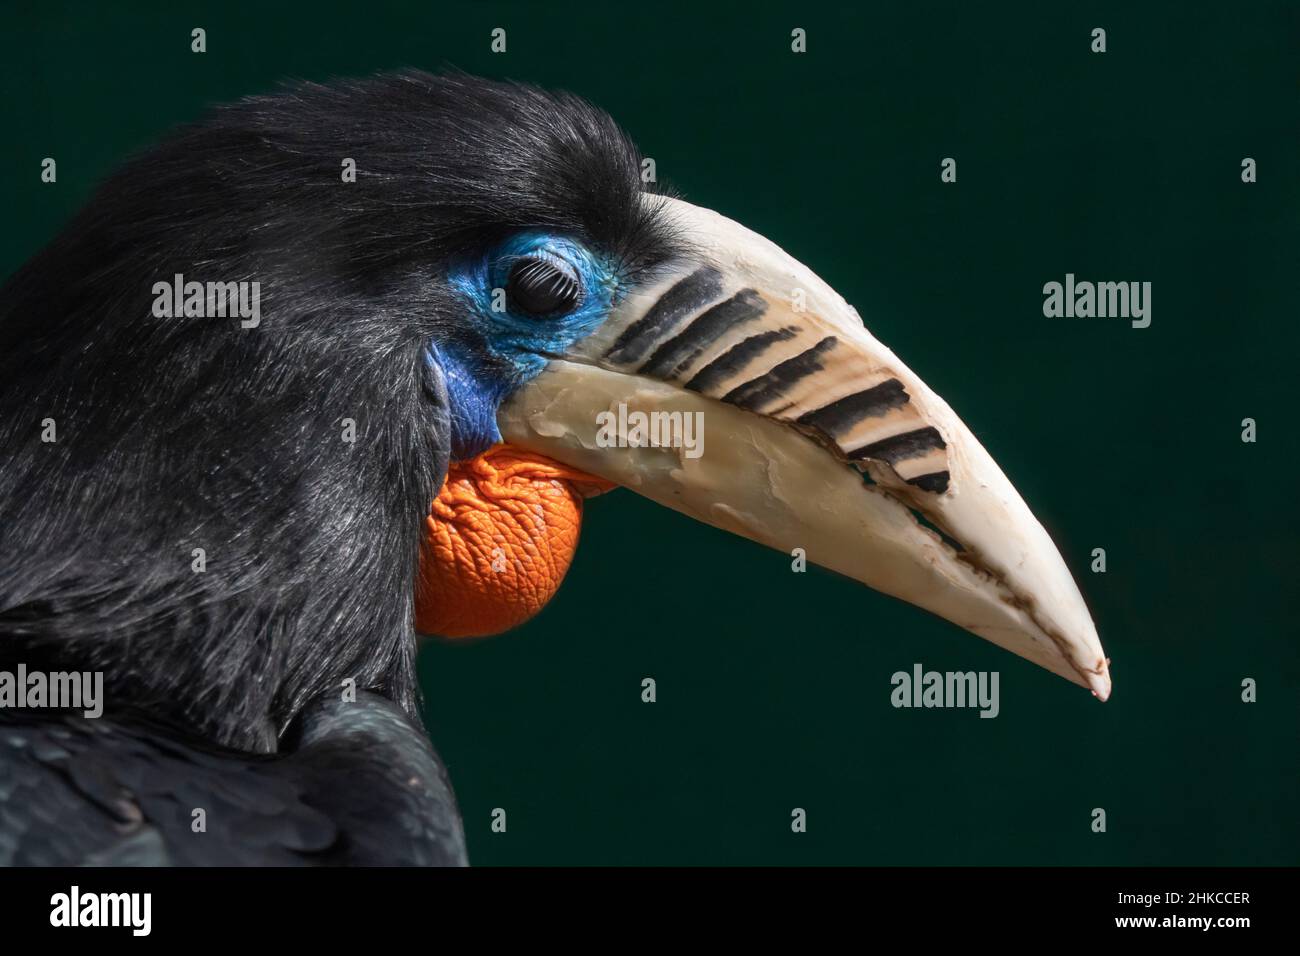 A rufous-necked hornbill (Aceros nipalensis) endemic to Bhutan and northeastern India, especially in Arunachal Pradesh, Indian Subcontinent and Southeast Asia. Stock Photo